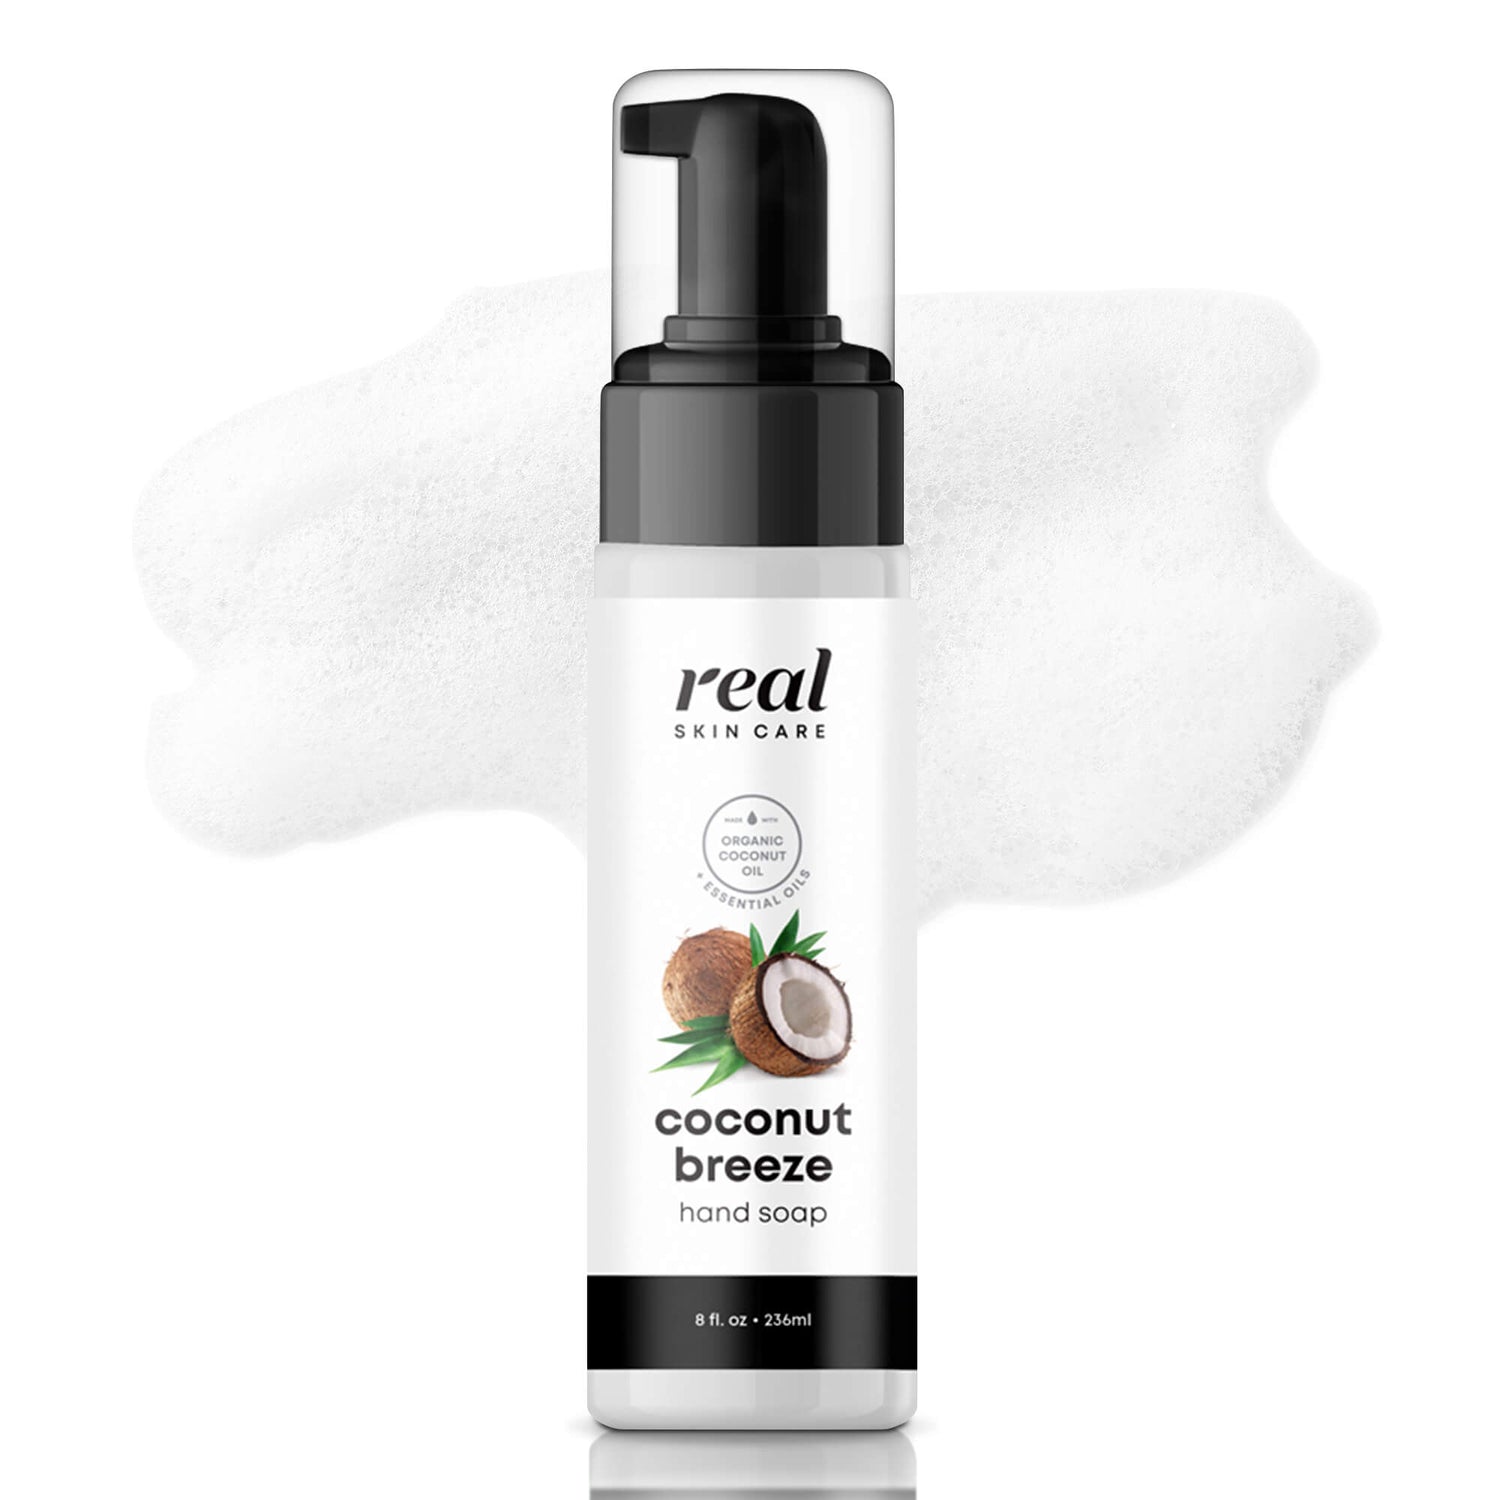 Real Skin Care Liquid Hand Soap with Coconut Oil | Handmade in the USA | Fragrance Free Organic Foaming Liquid Soap | 8oz